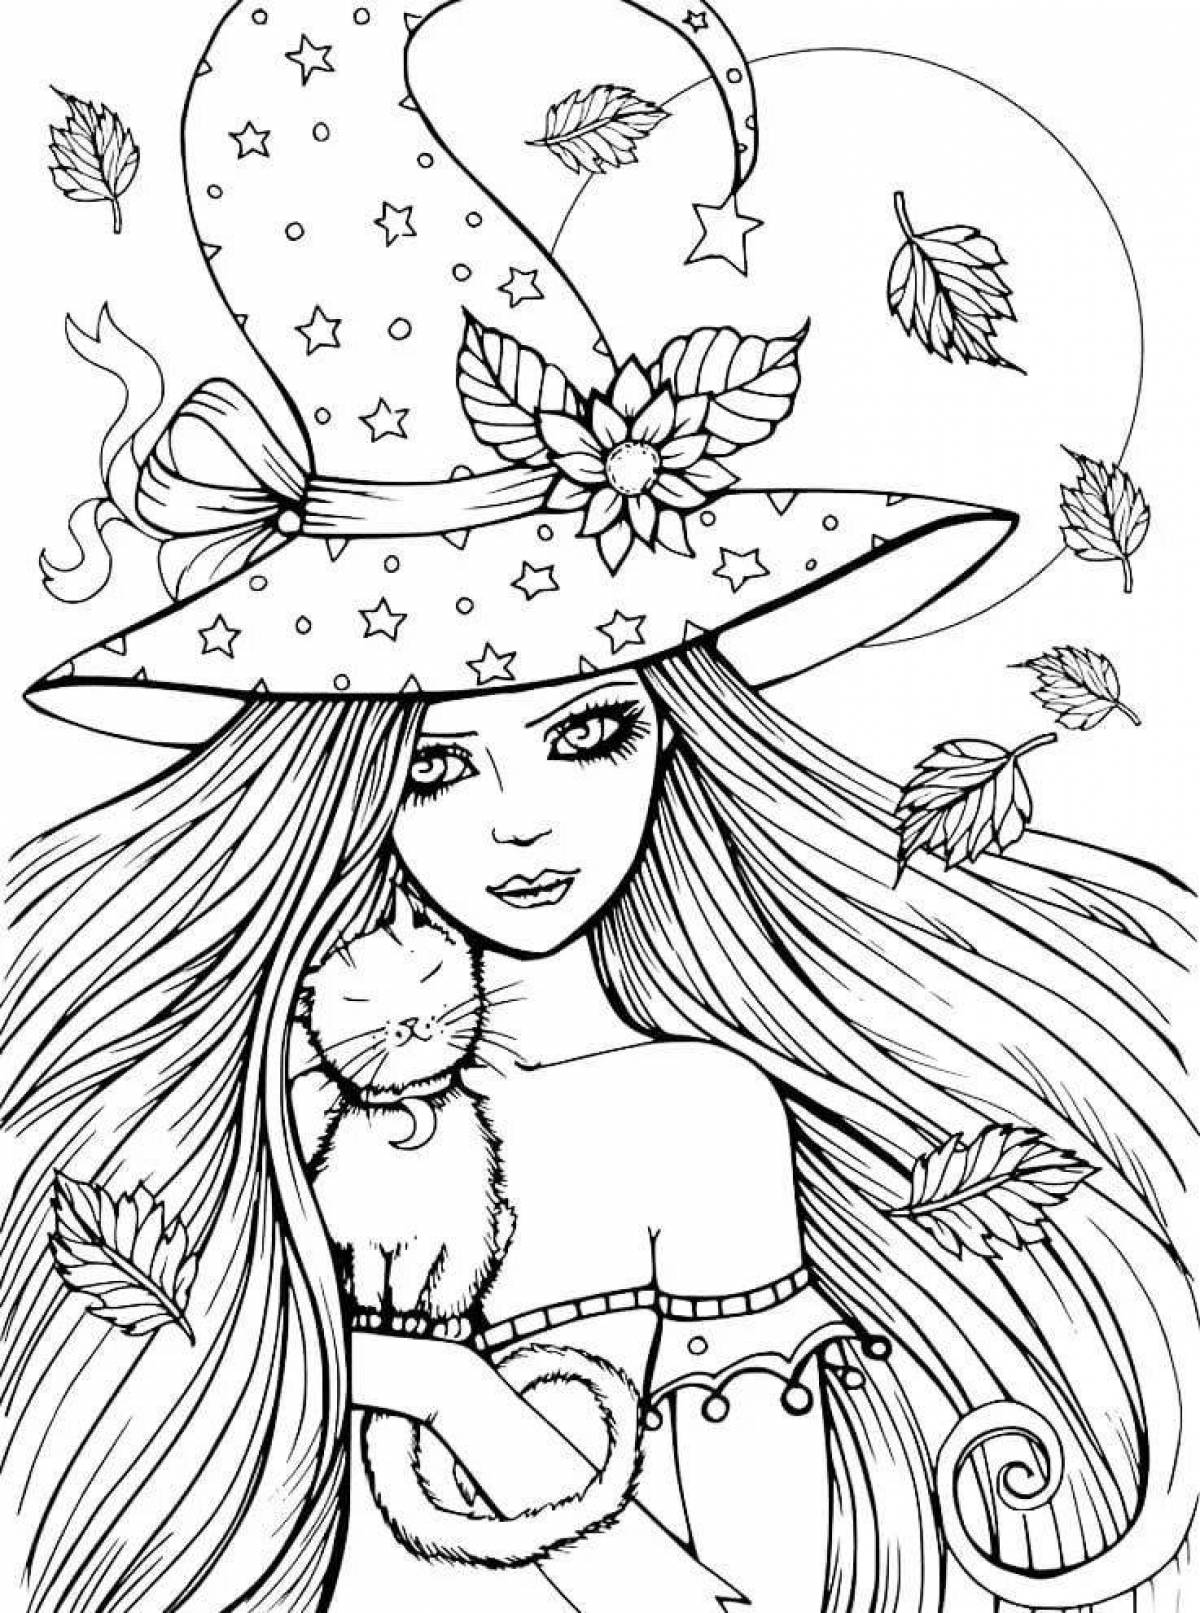 Creative coloring book for girls 12-13 years old